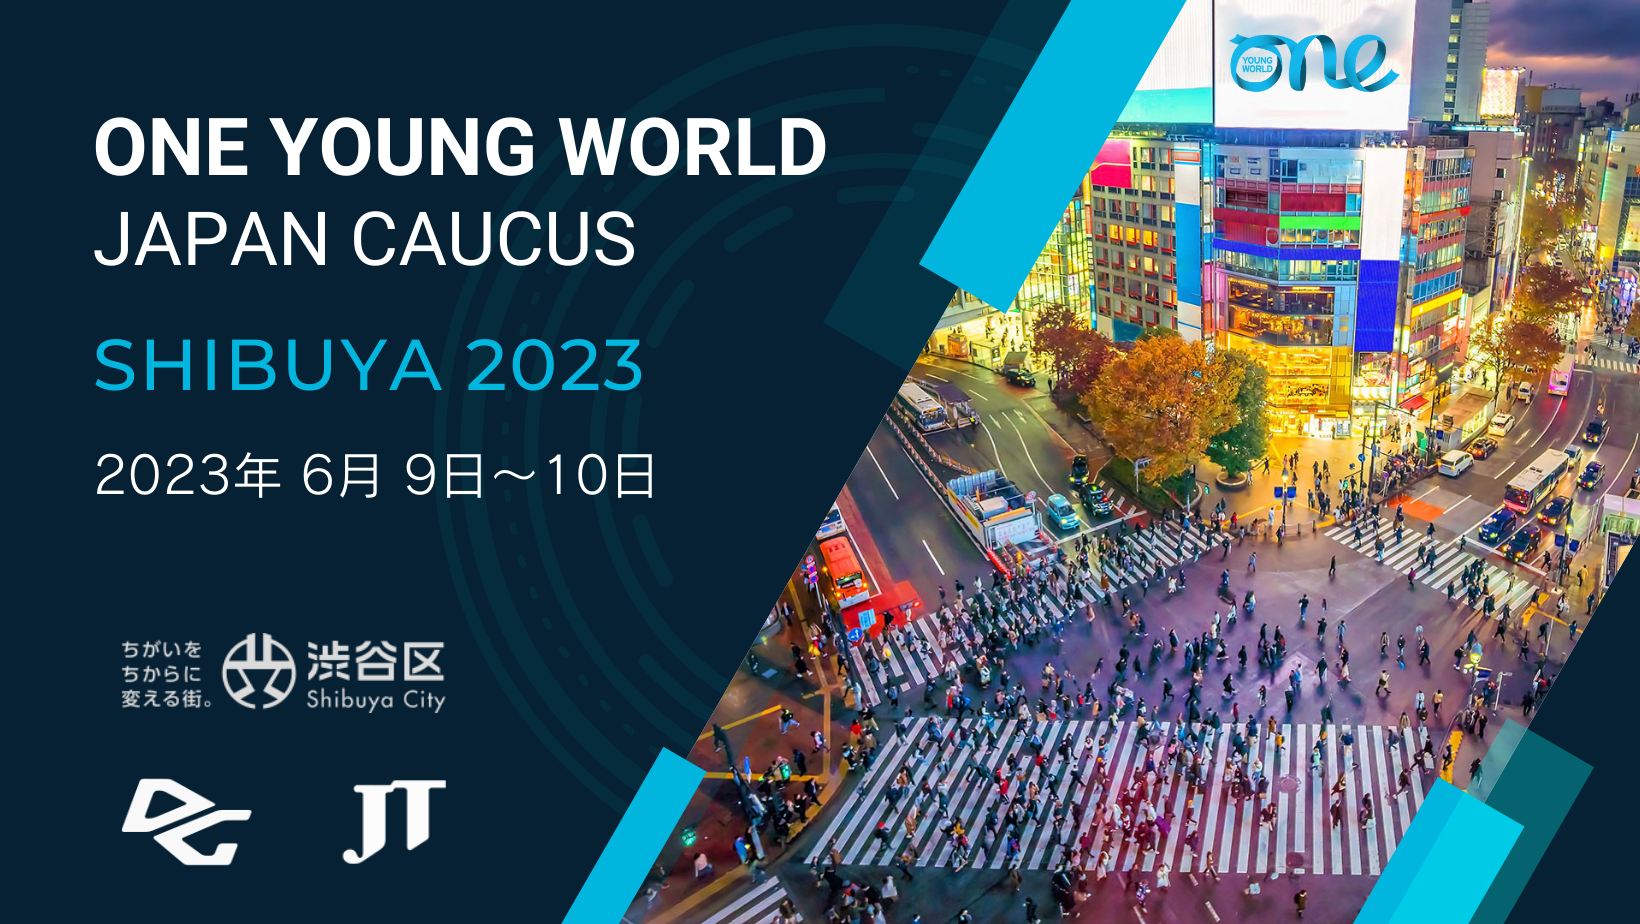 OYW JAPAN CAUCUS 2023 POST EVENT REPORT